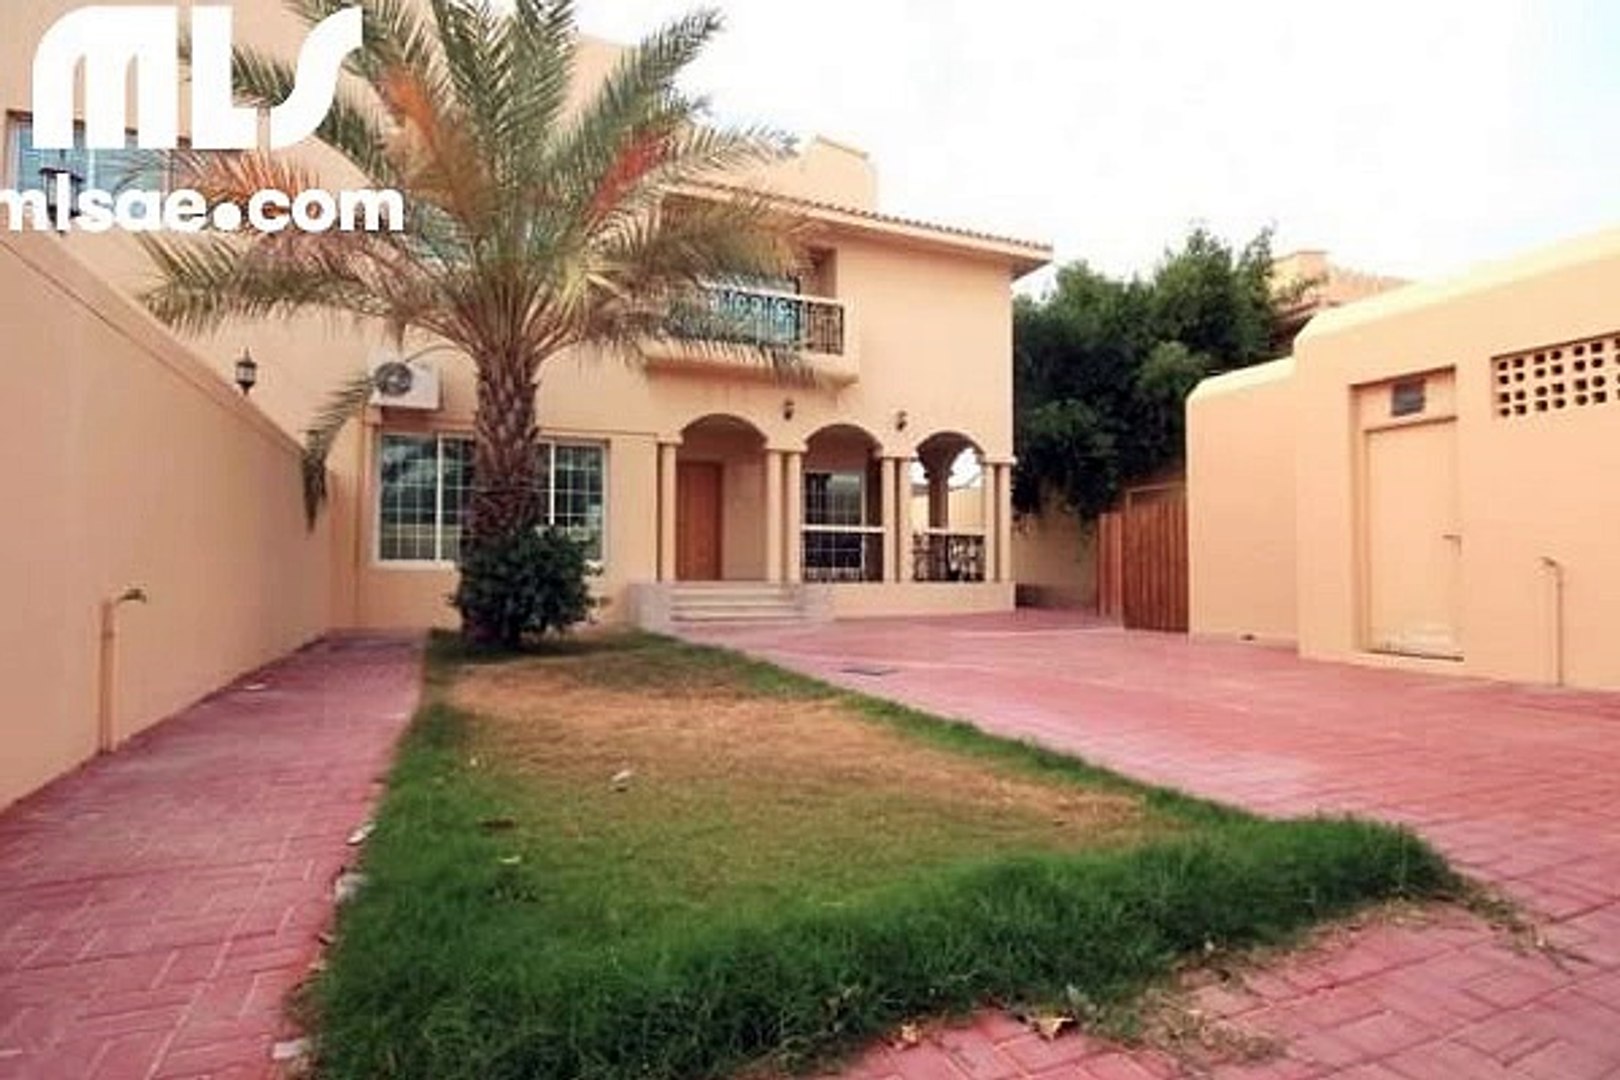 BEAUTIFUL 3BR MAIDS SEMI DETACHED VILLA WITH PRIVATE GARDEN AND POOL IN UMM SUQEIM 2 - mlsae.com